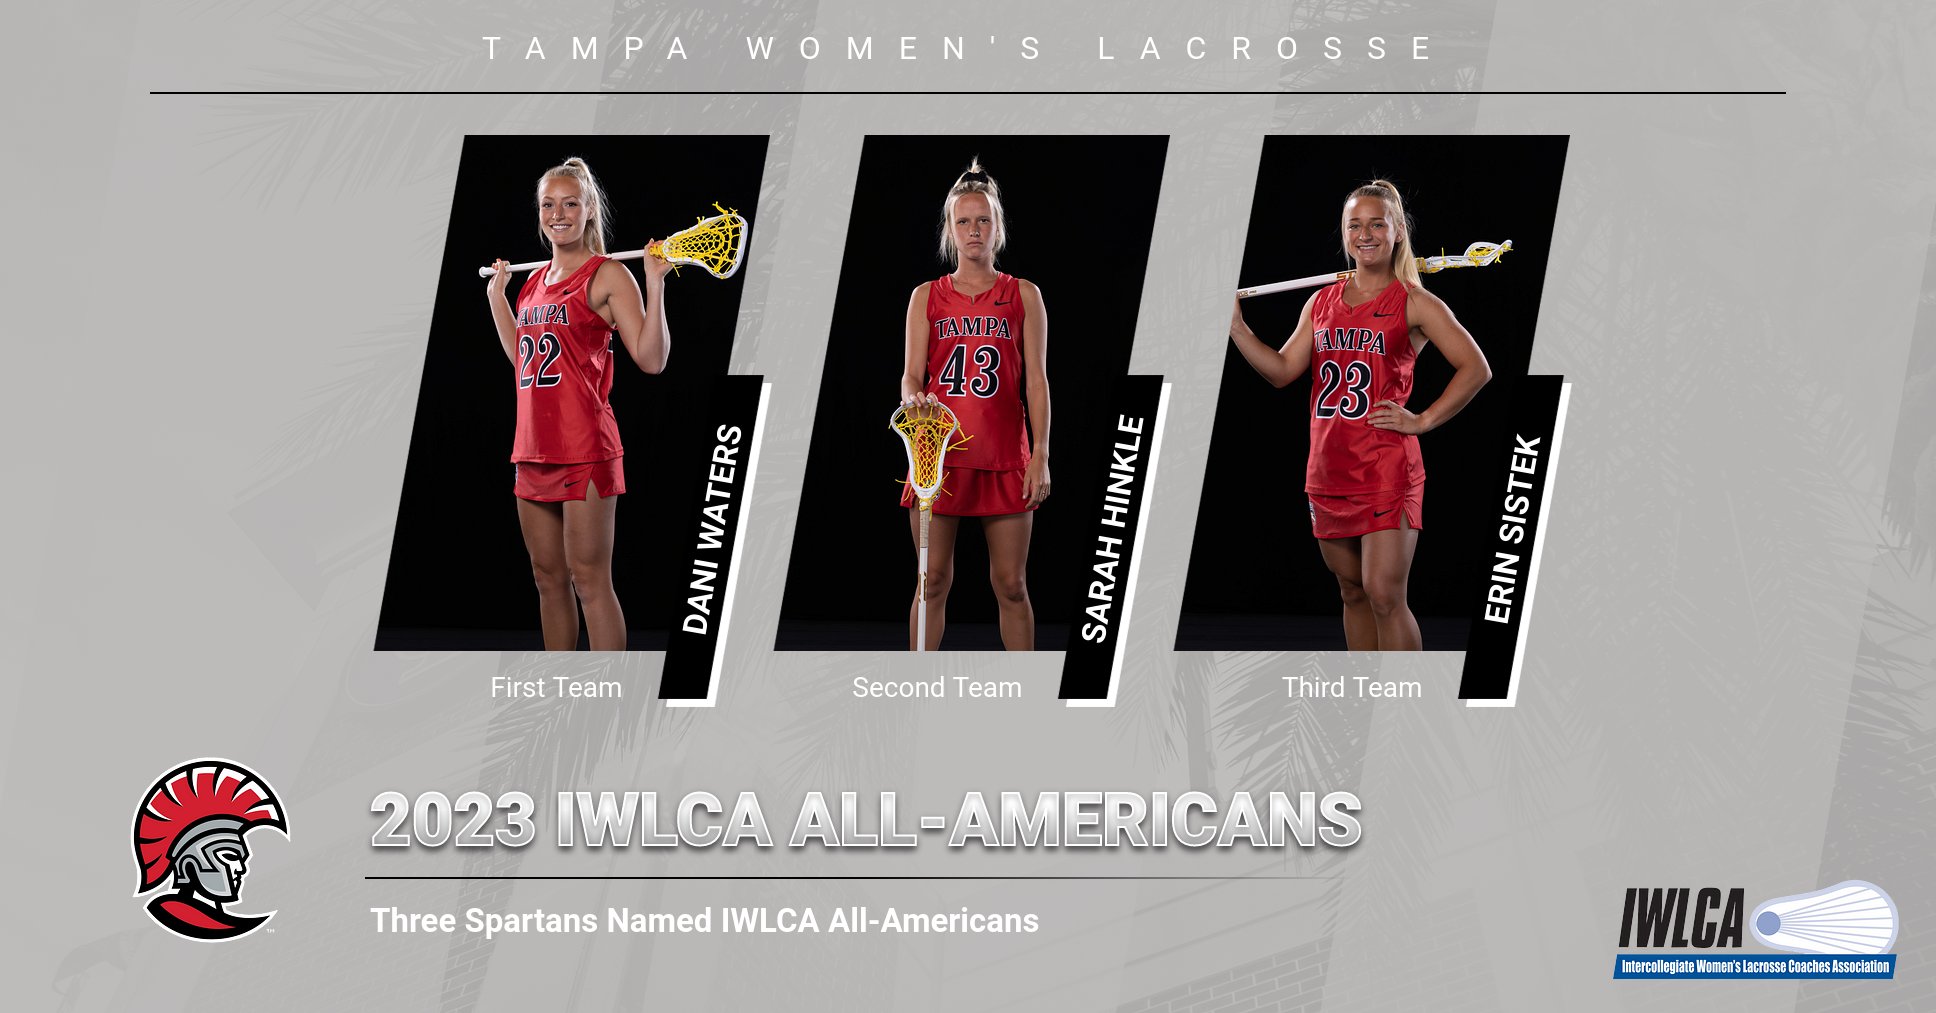 2023 IWLCA All-Americans